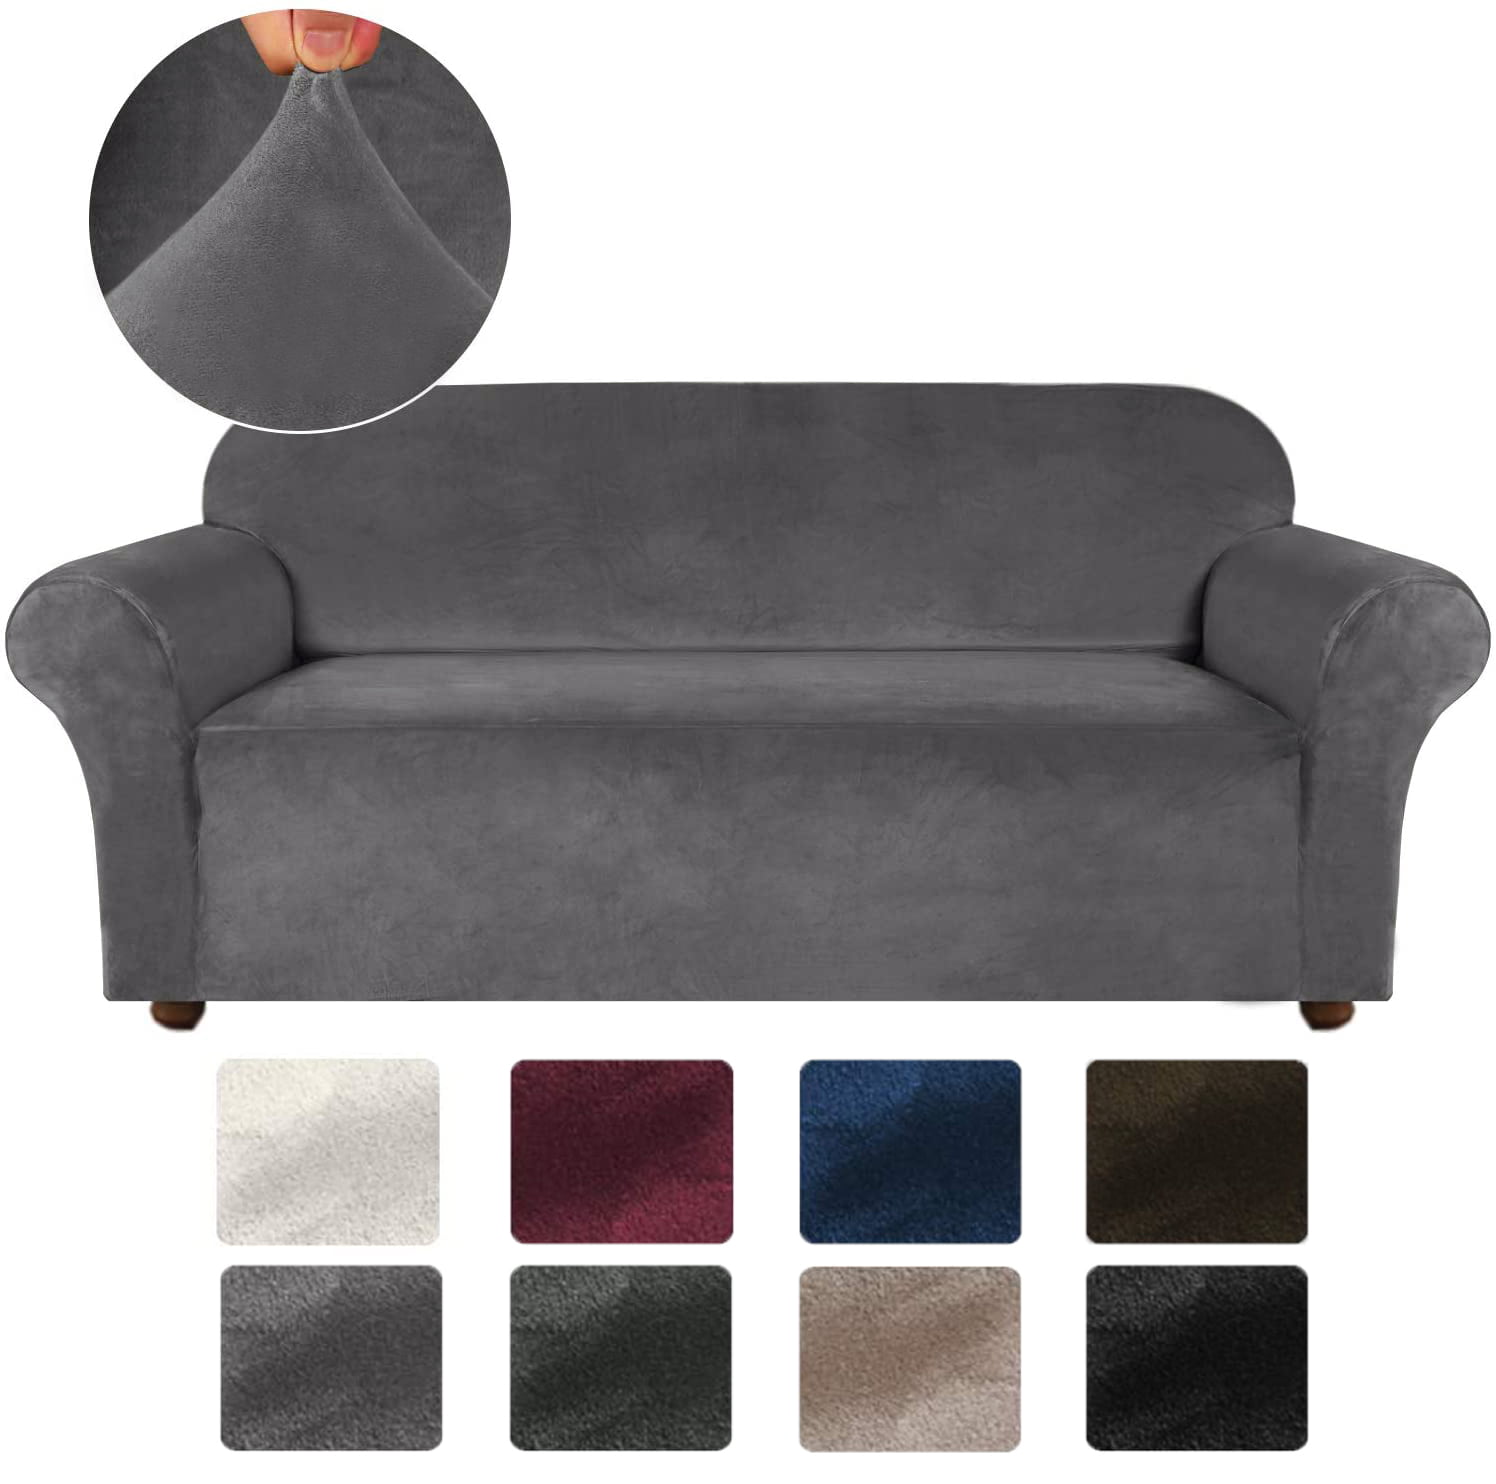 Sofa 72-96, Taupe H.VERSAILTEX Stretch Velvet Sofa Covers for 3 Cushion Couch Covers Sofa Slipcovers with Non Slip Straps Underneath The Furniture Crafted from Thick Comfy Rich Velour